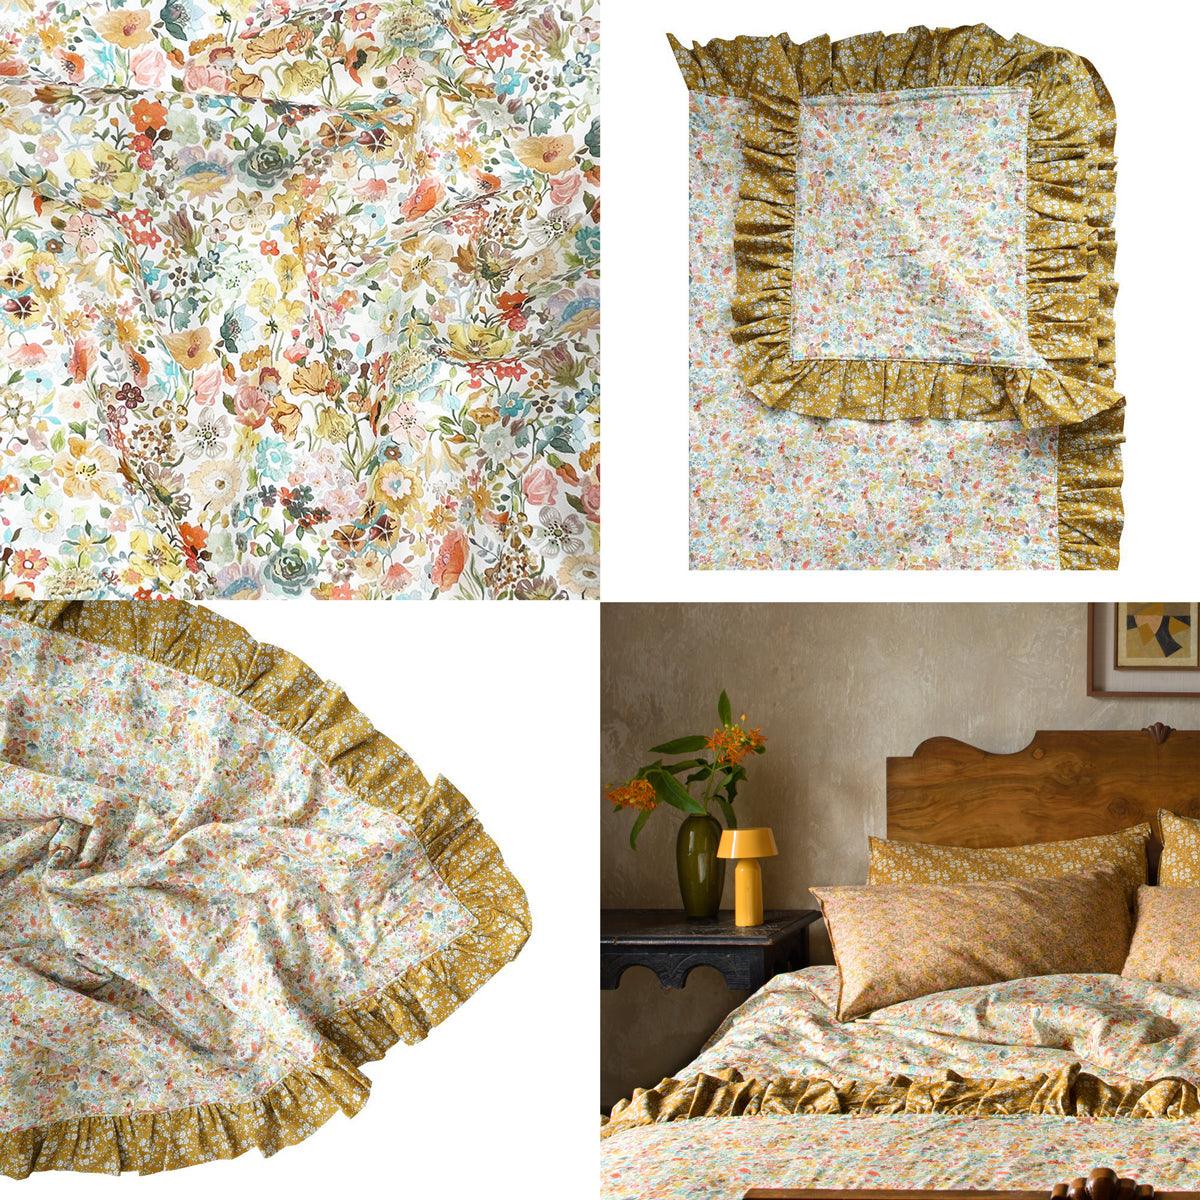 Ruffle Bedspread made with Liberty Fabric CLASSIC MEADOW & CAPEL MUSTARD - Coco & Wolf